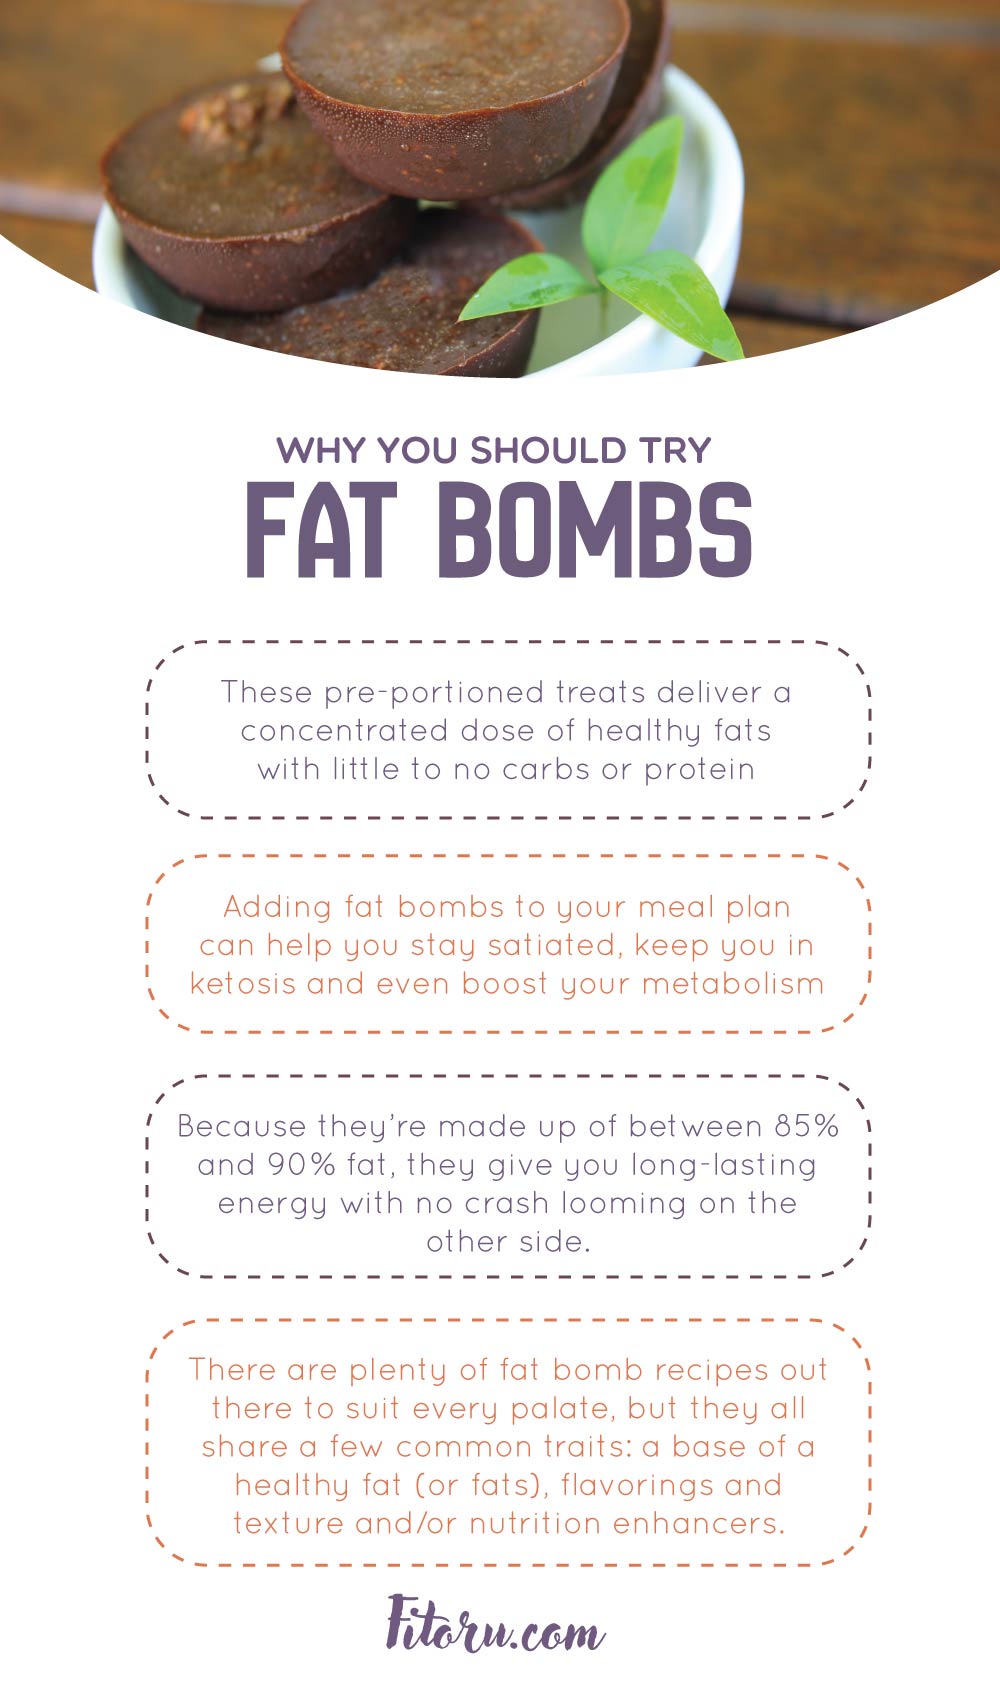 Why You Should Try Fat Bombs